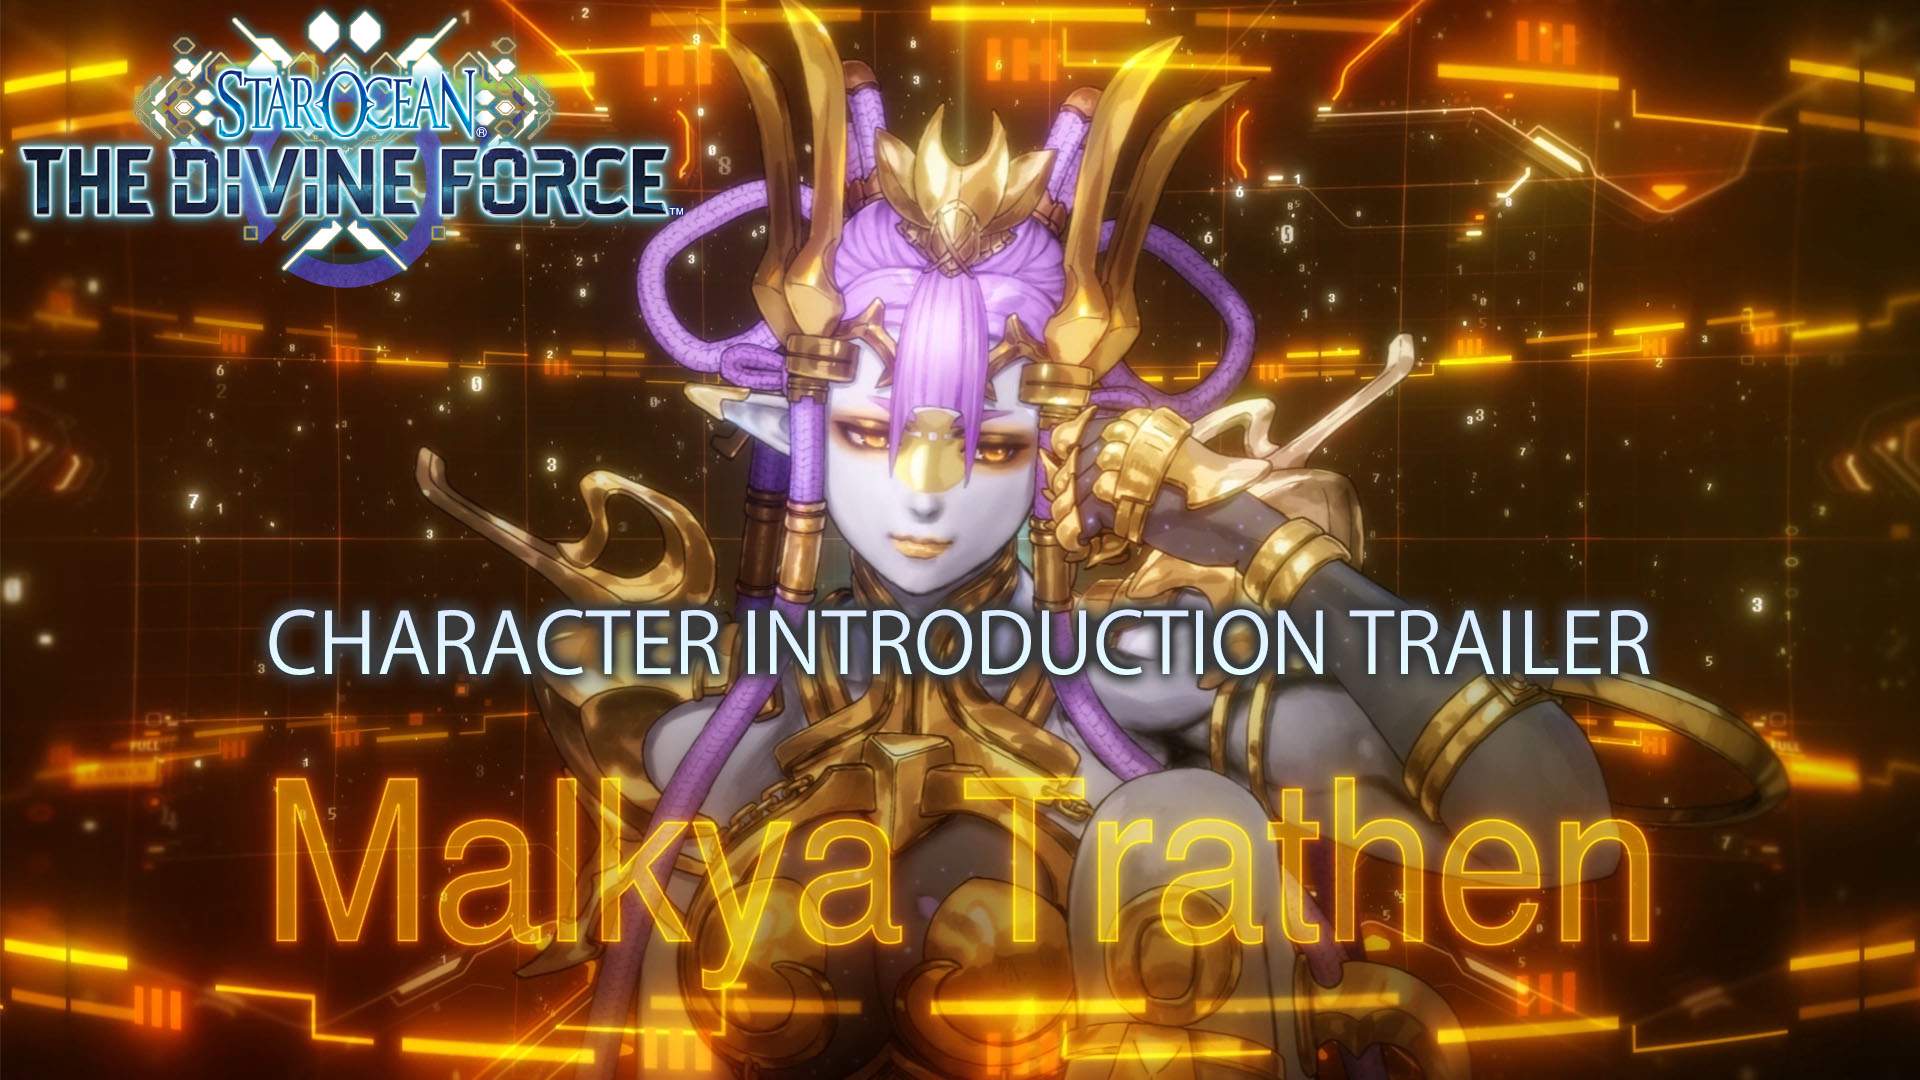 Character Malkya, the Trathen leader of Aster IV with the STAR OCEAN logo displayed.